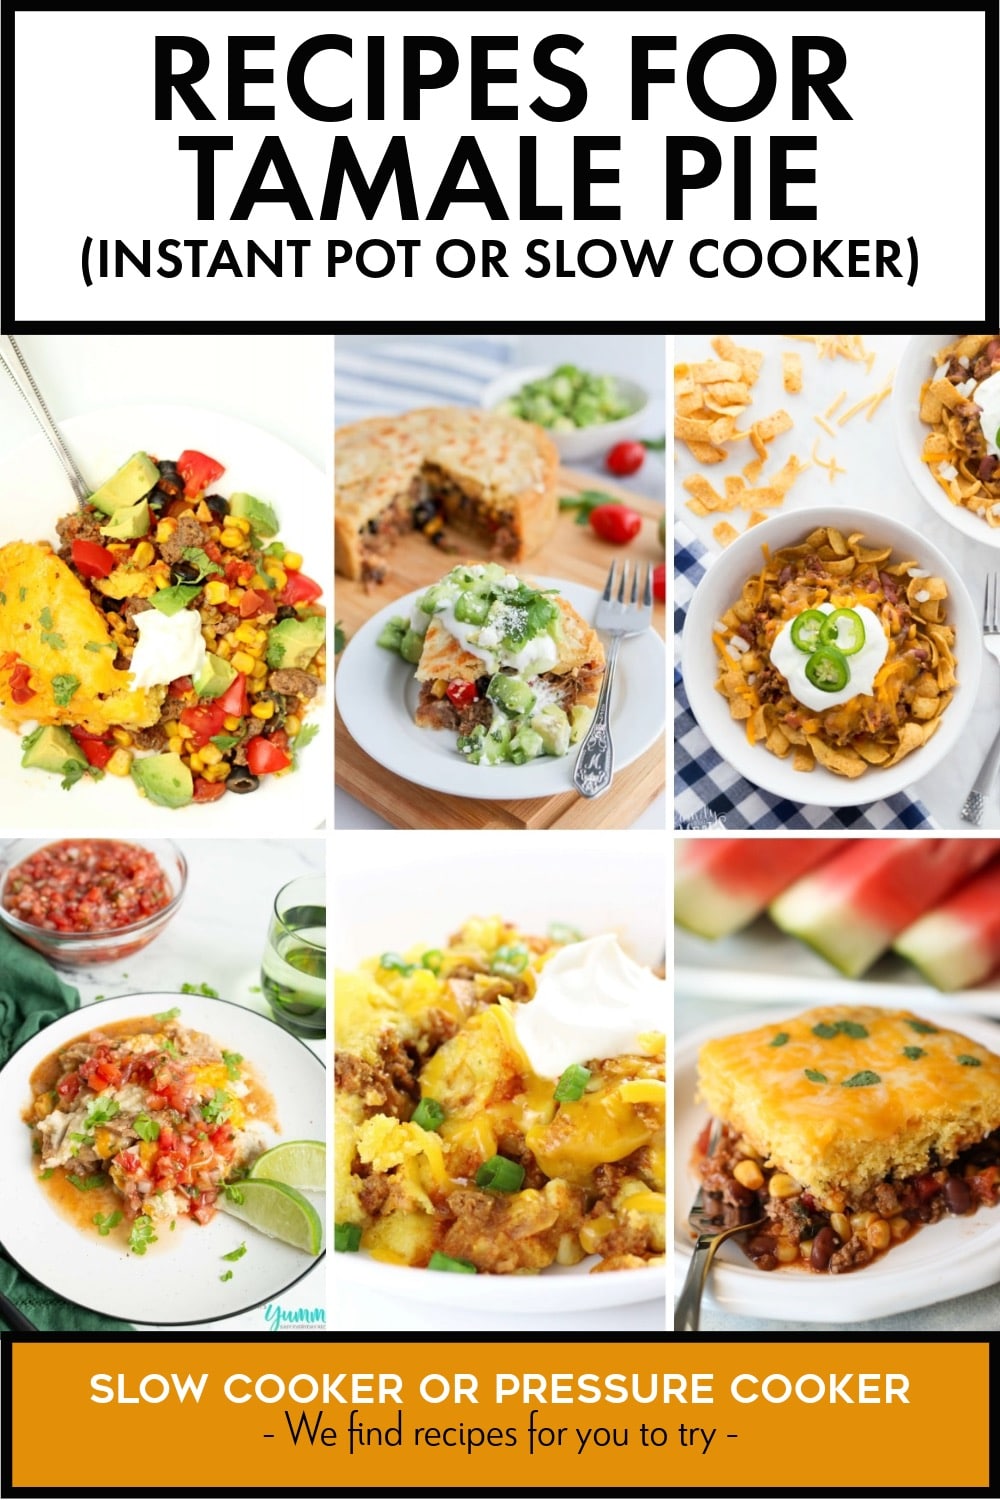 Pinterest image of Recipes for Tamale Pie (Slow Cooker or Instant Pot)